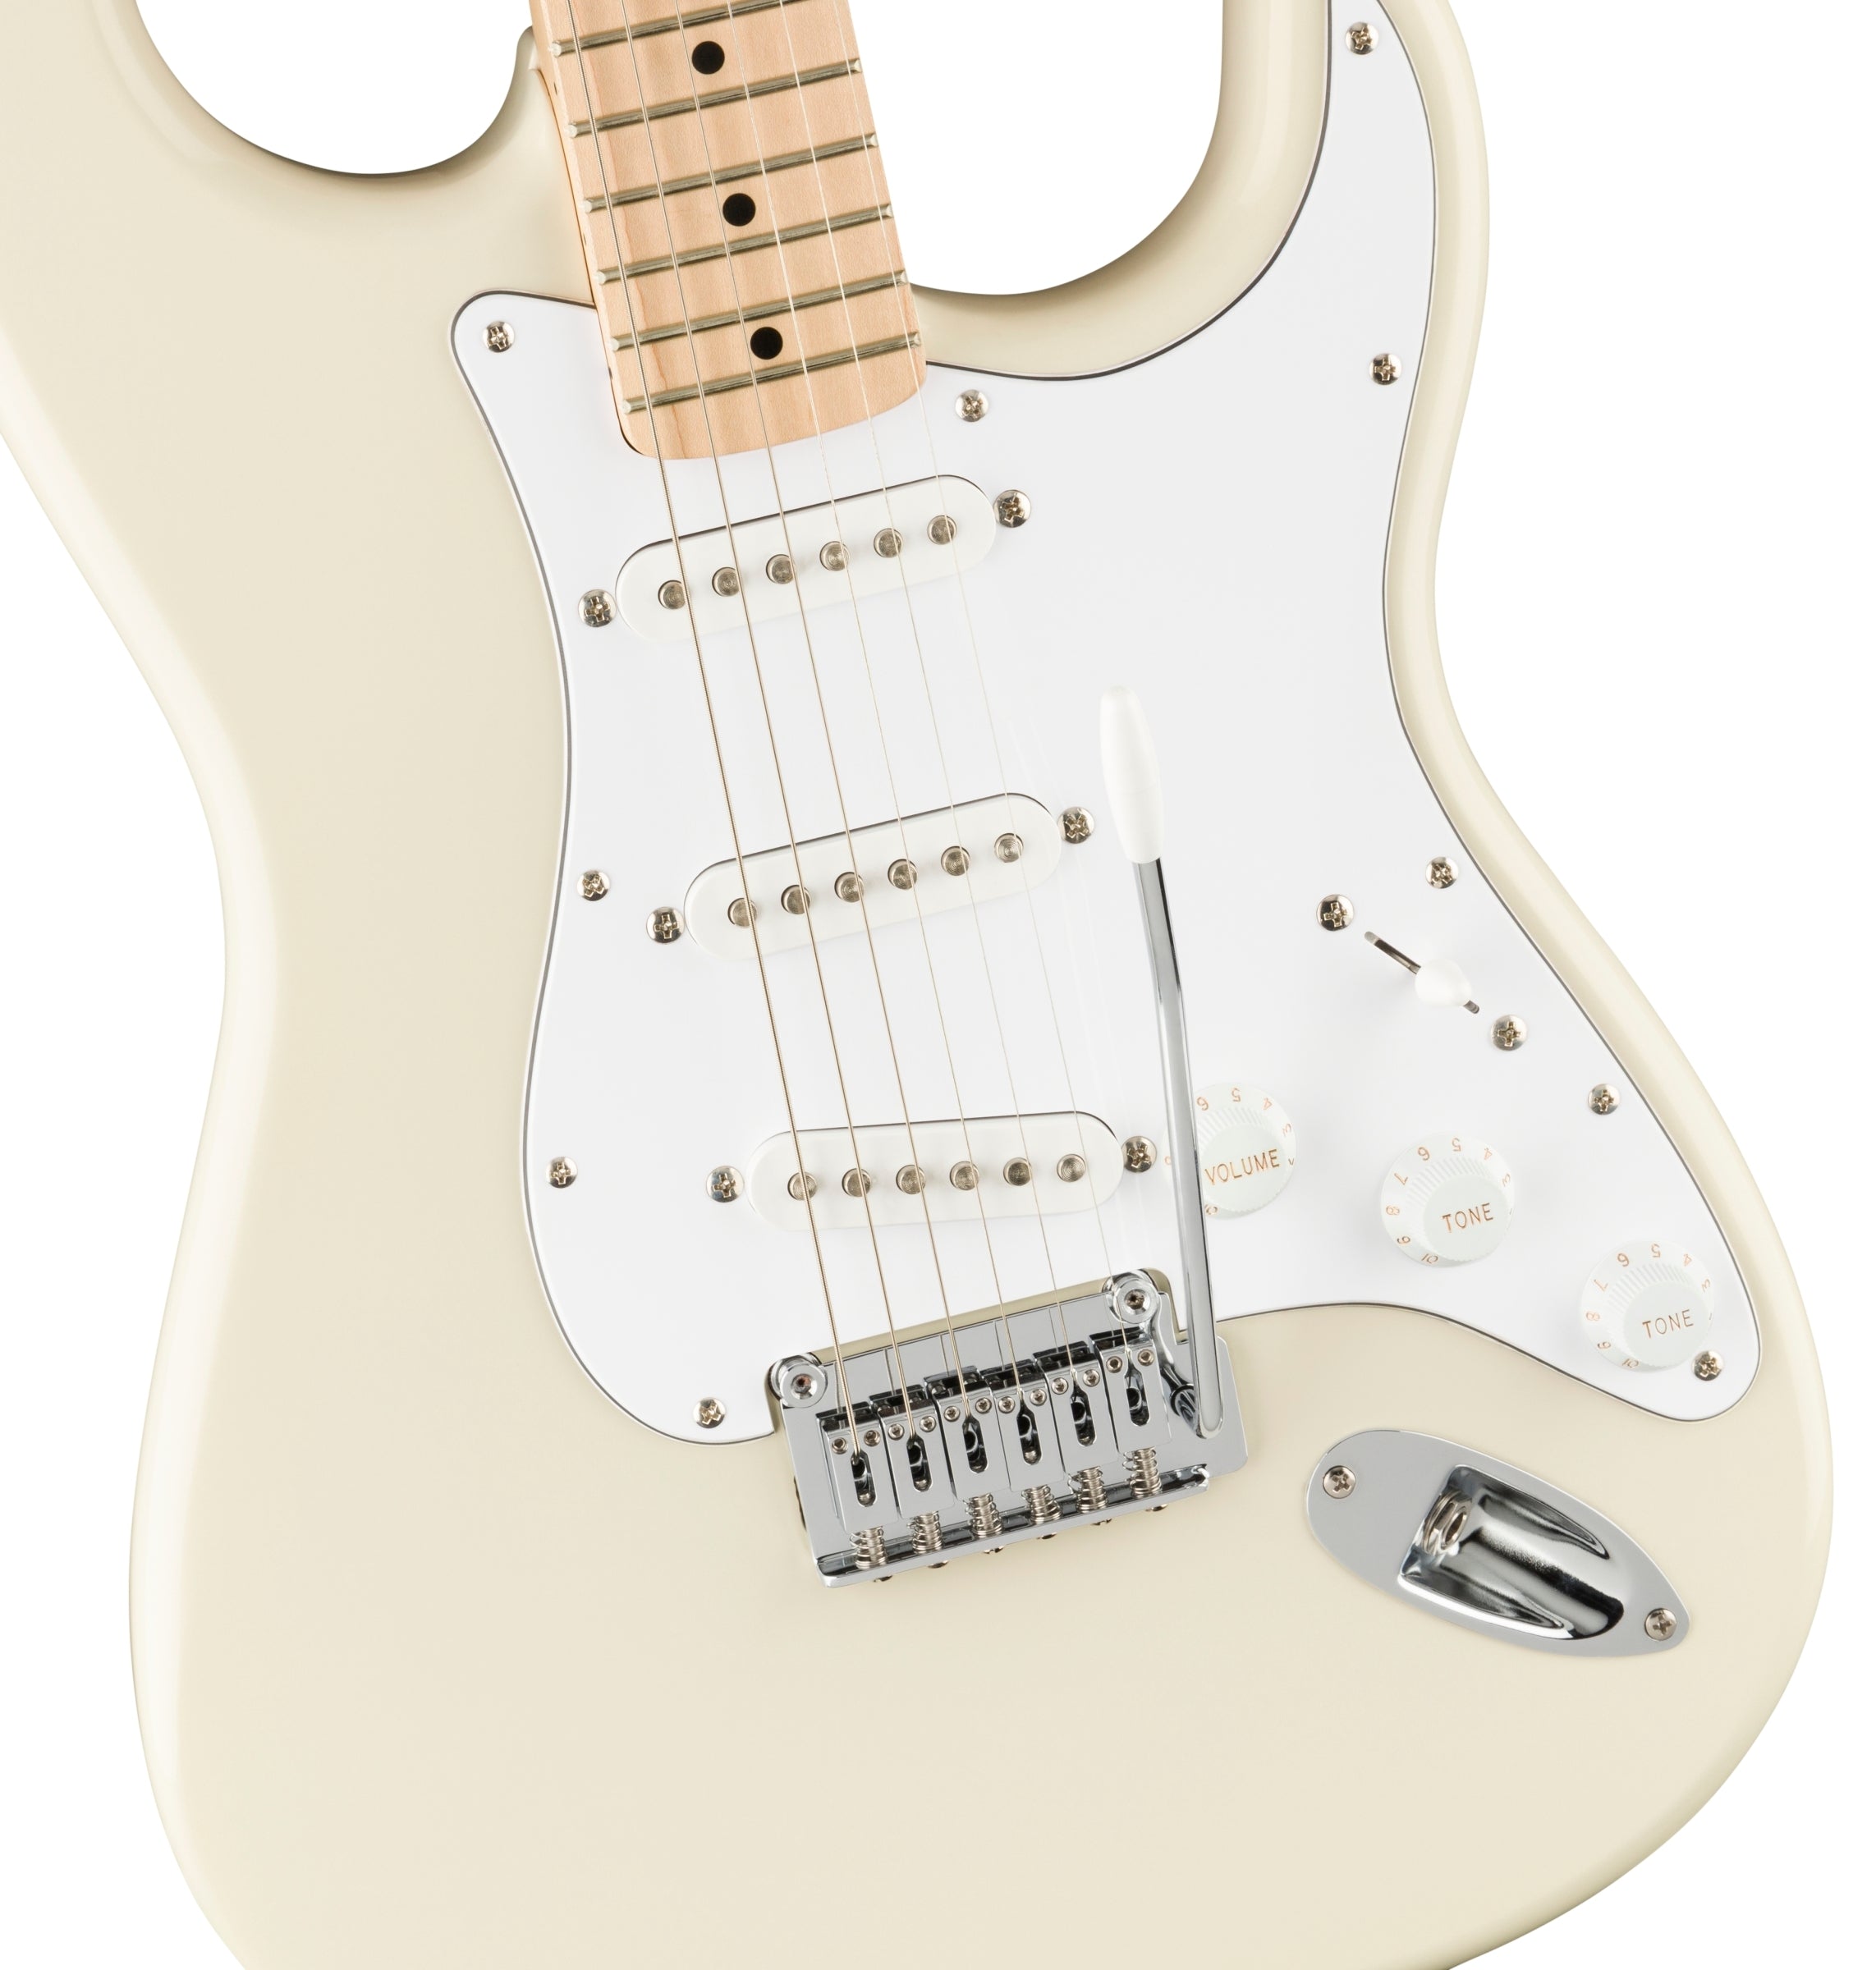 Squier Affinity Series Stratocaster Electric Guitar - Olympic White